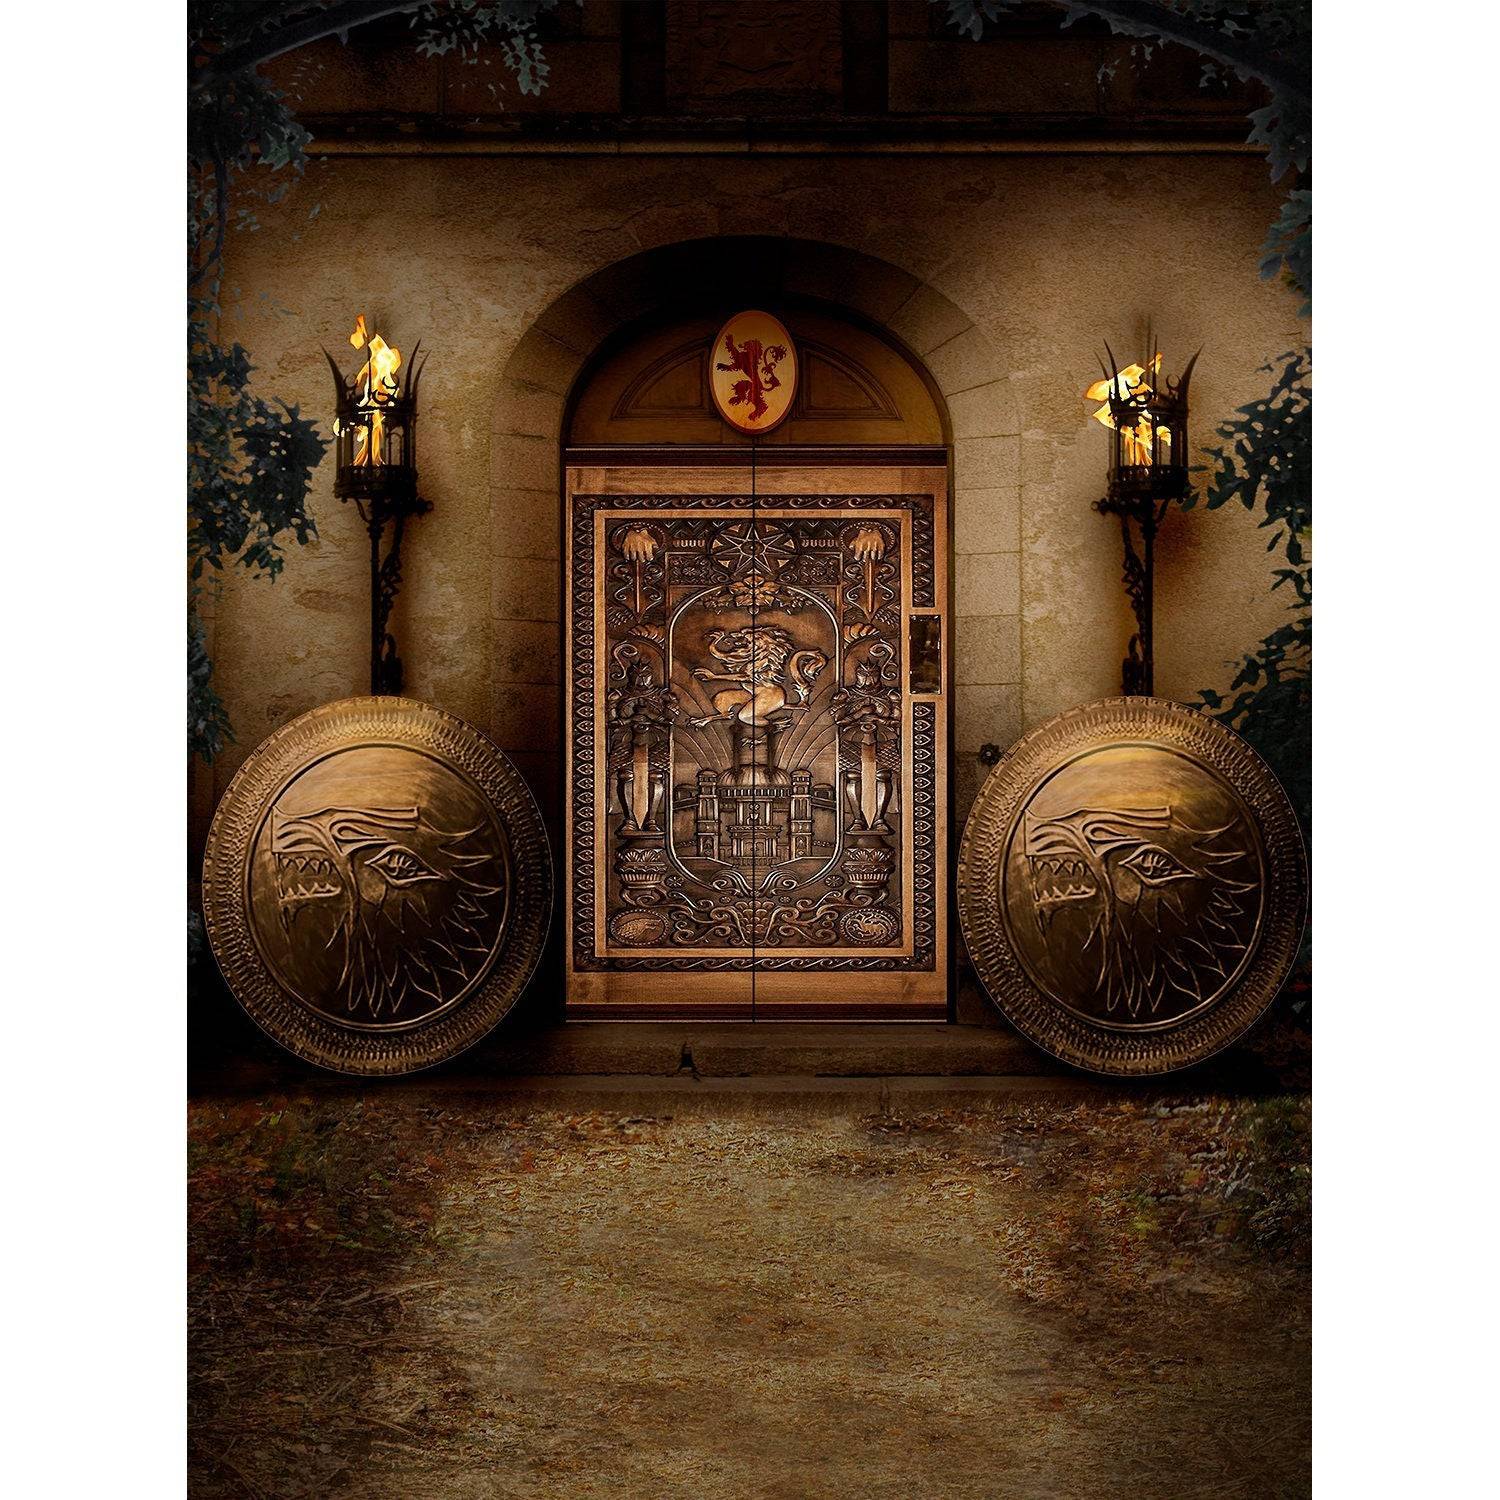 Medieval Game of Thrones Castle Interior Photo Backdrop - Basic 8  x 10  